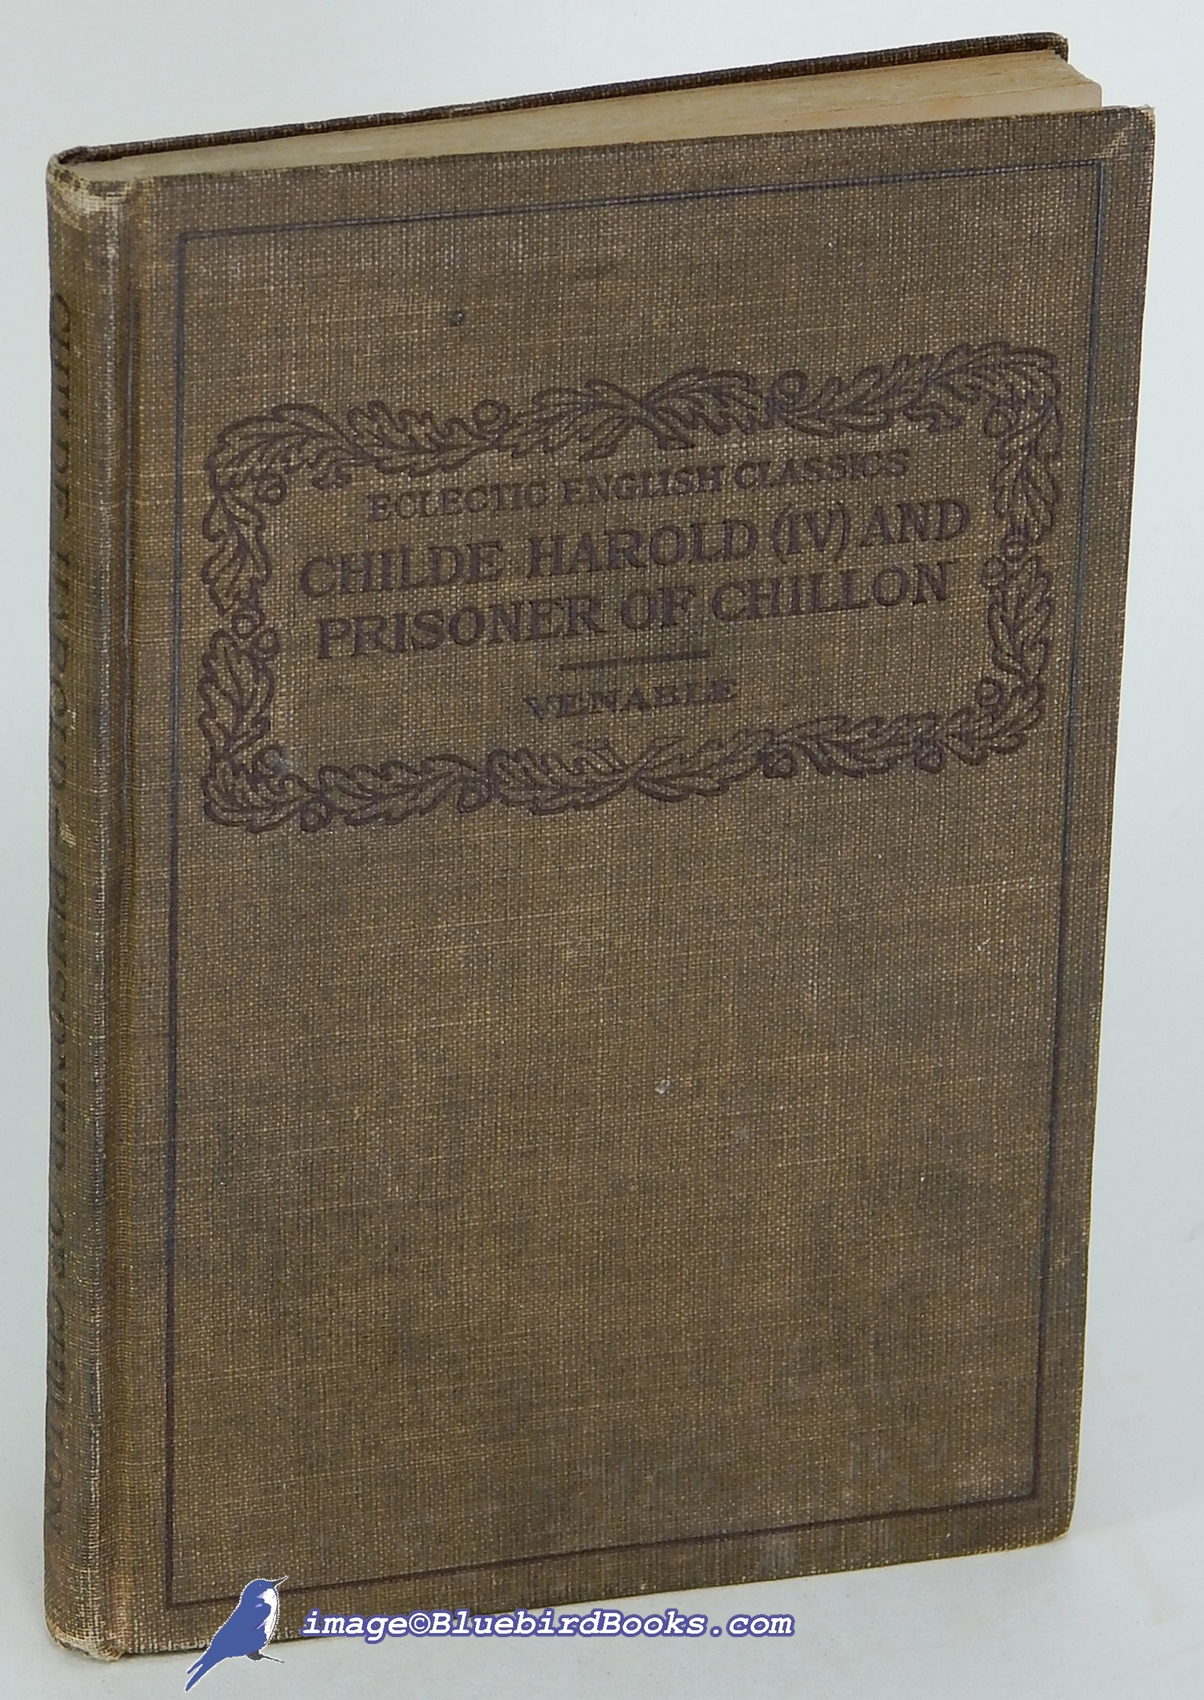 BYRON, LORD; VENABLE, W. H. (EDITOR) - Childe Harold (Canto IV), Prisoner of Chillon and Other Selections